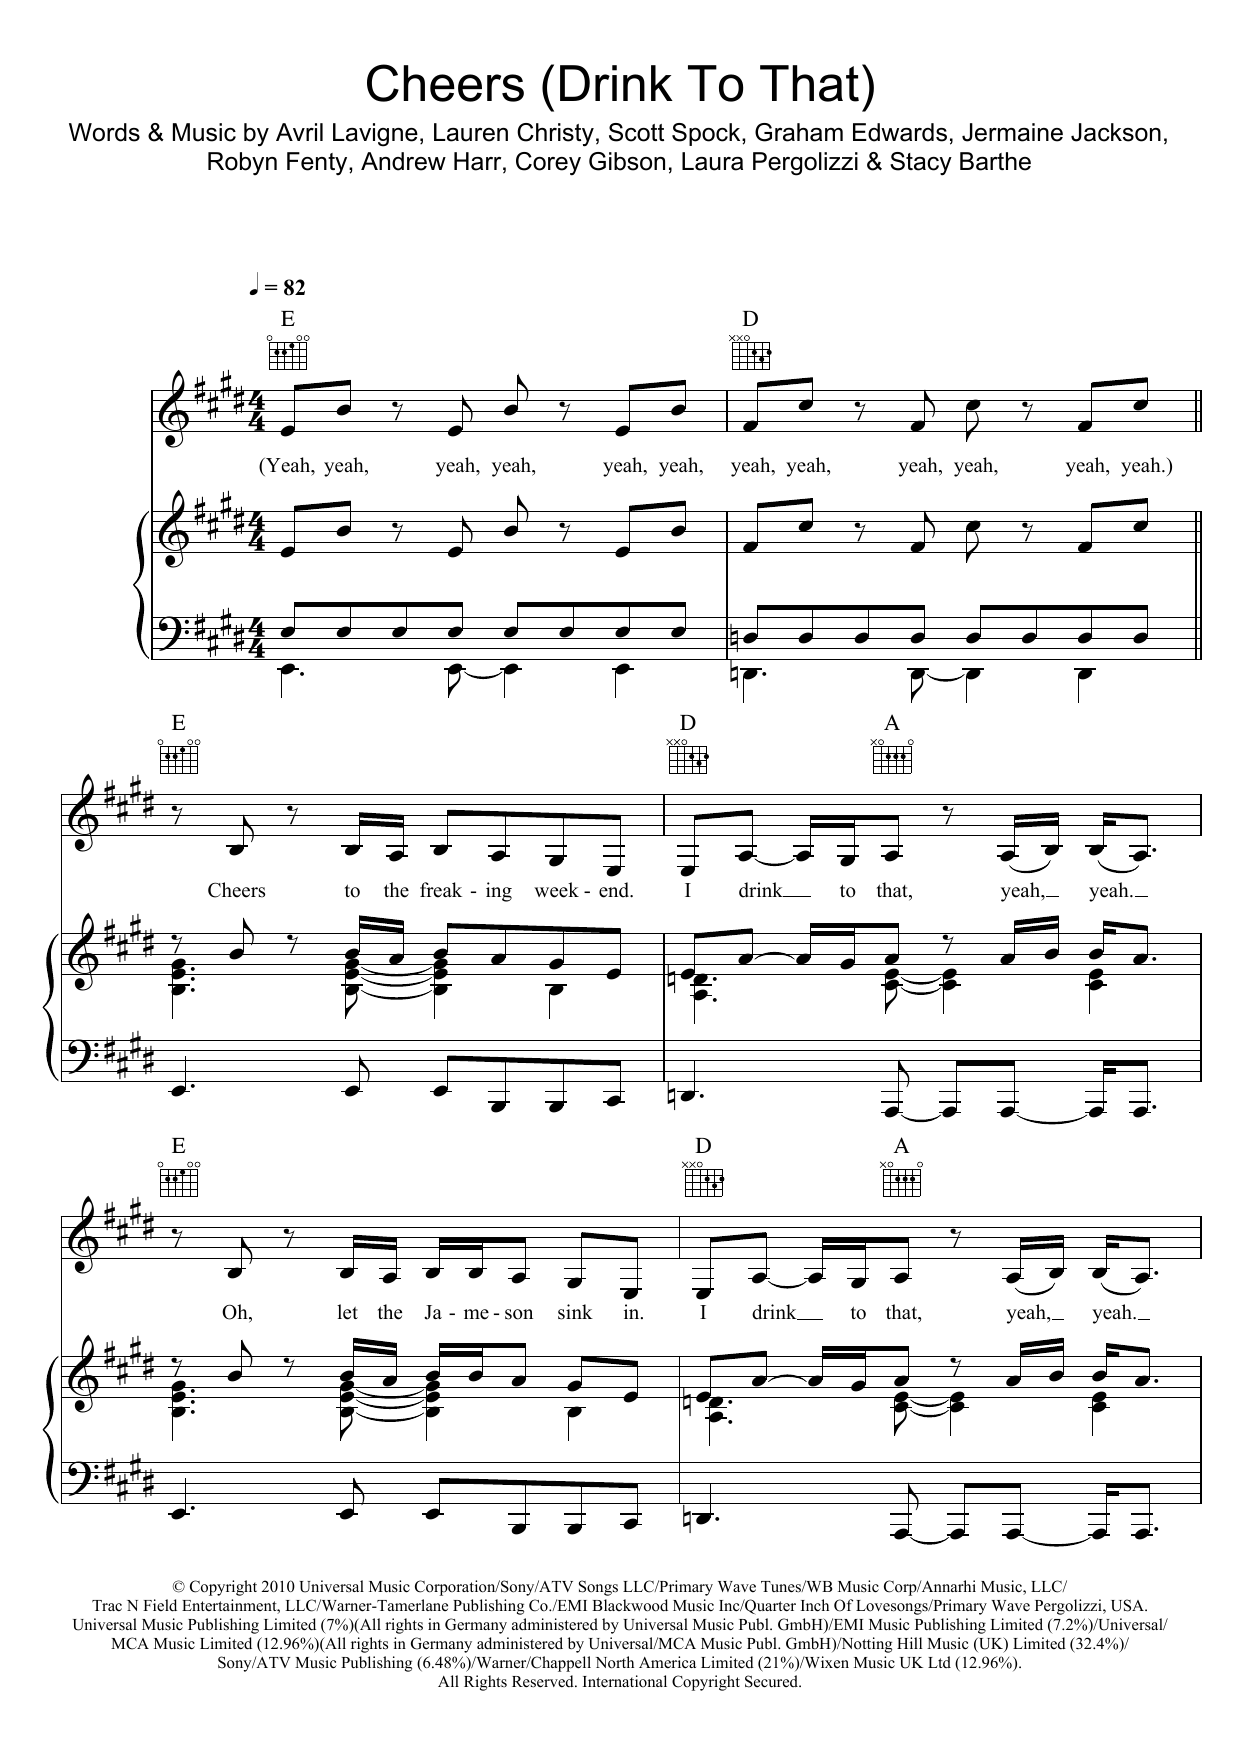 Download Rihanna Cheers (Drink To That) Sheet Music